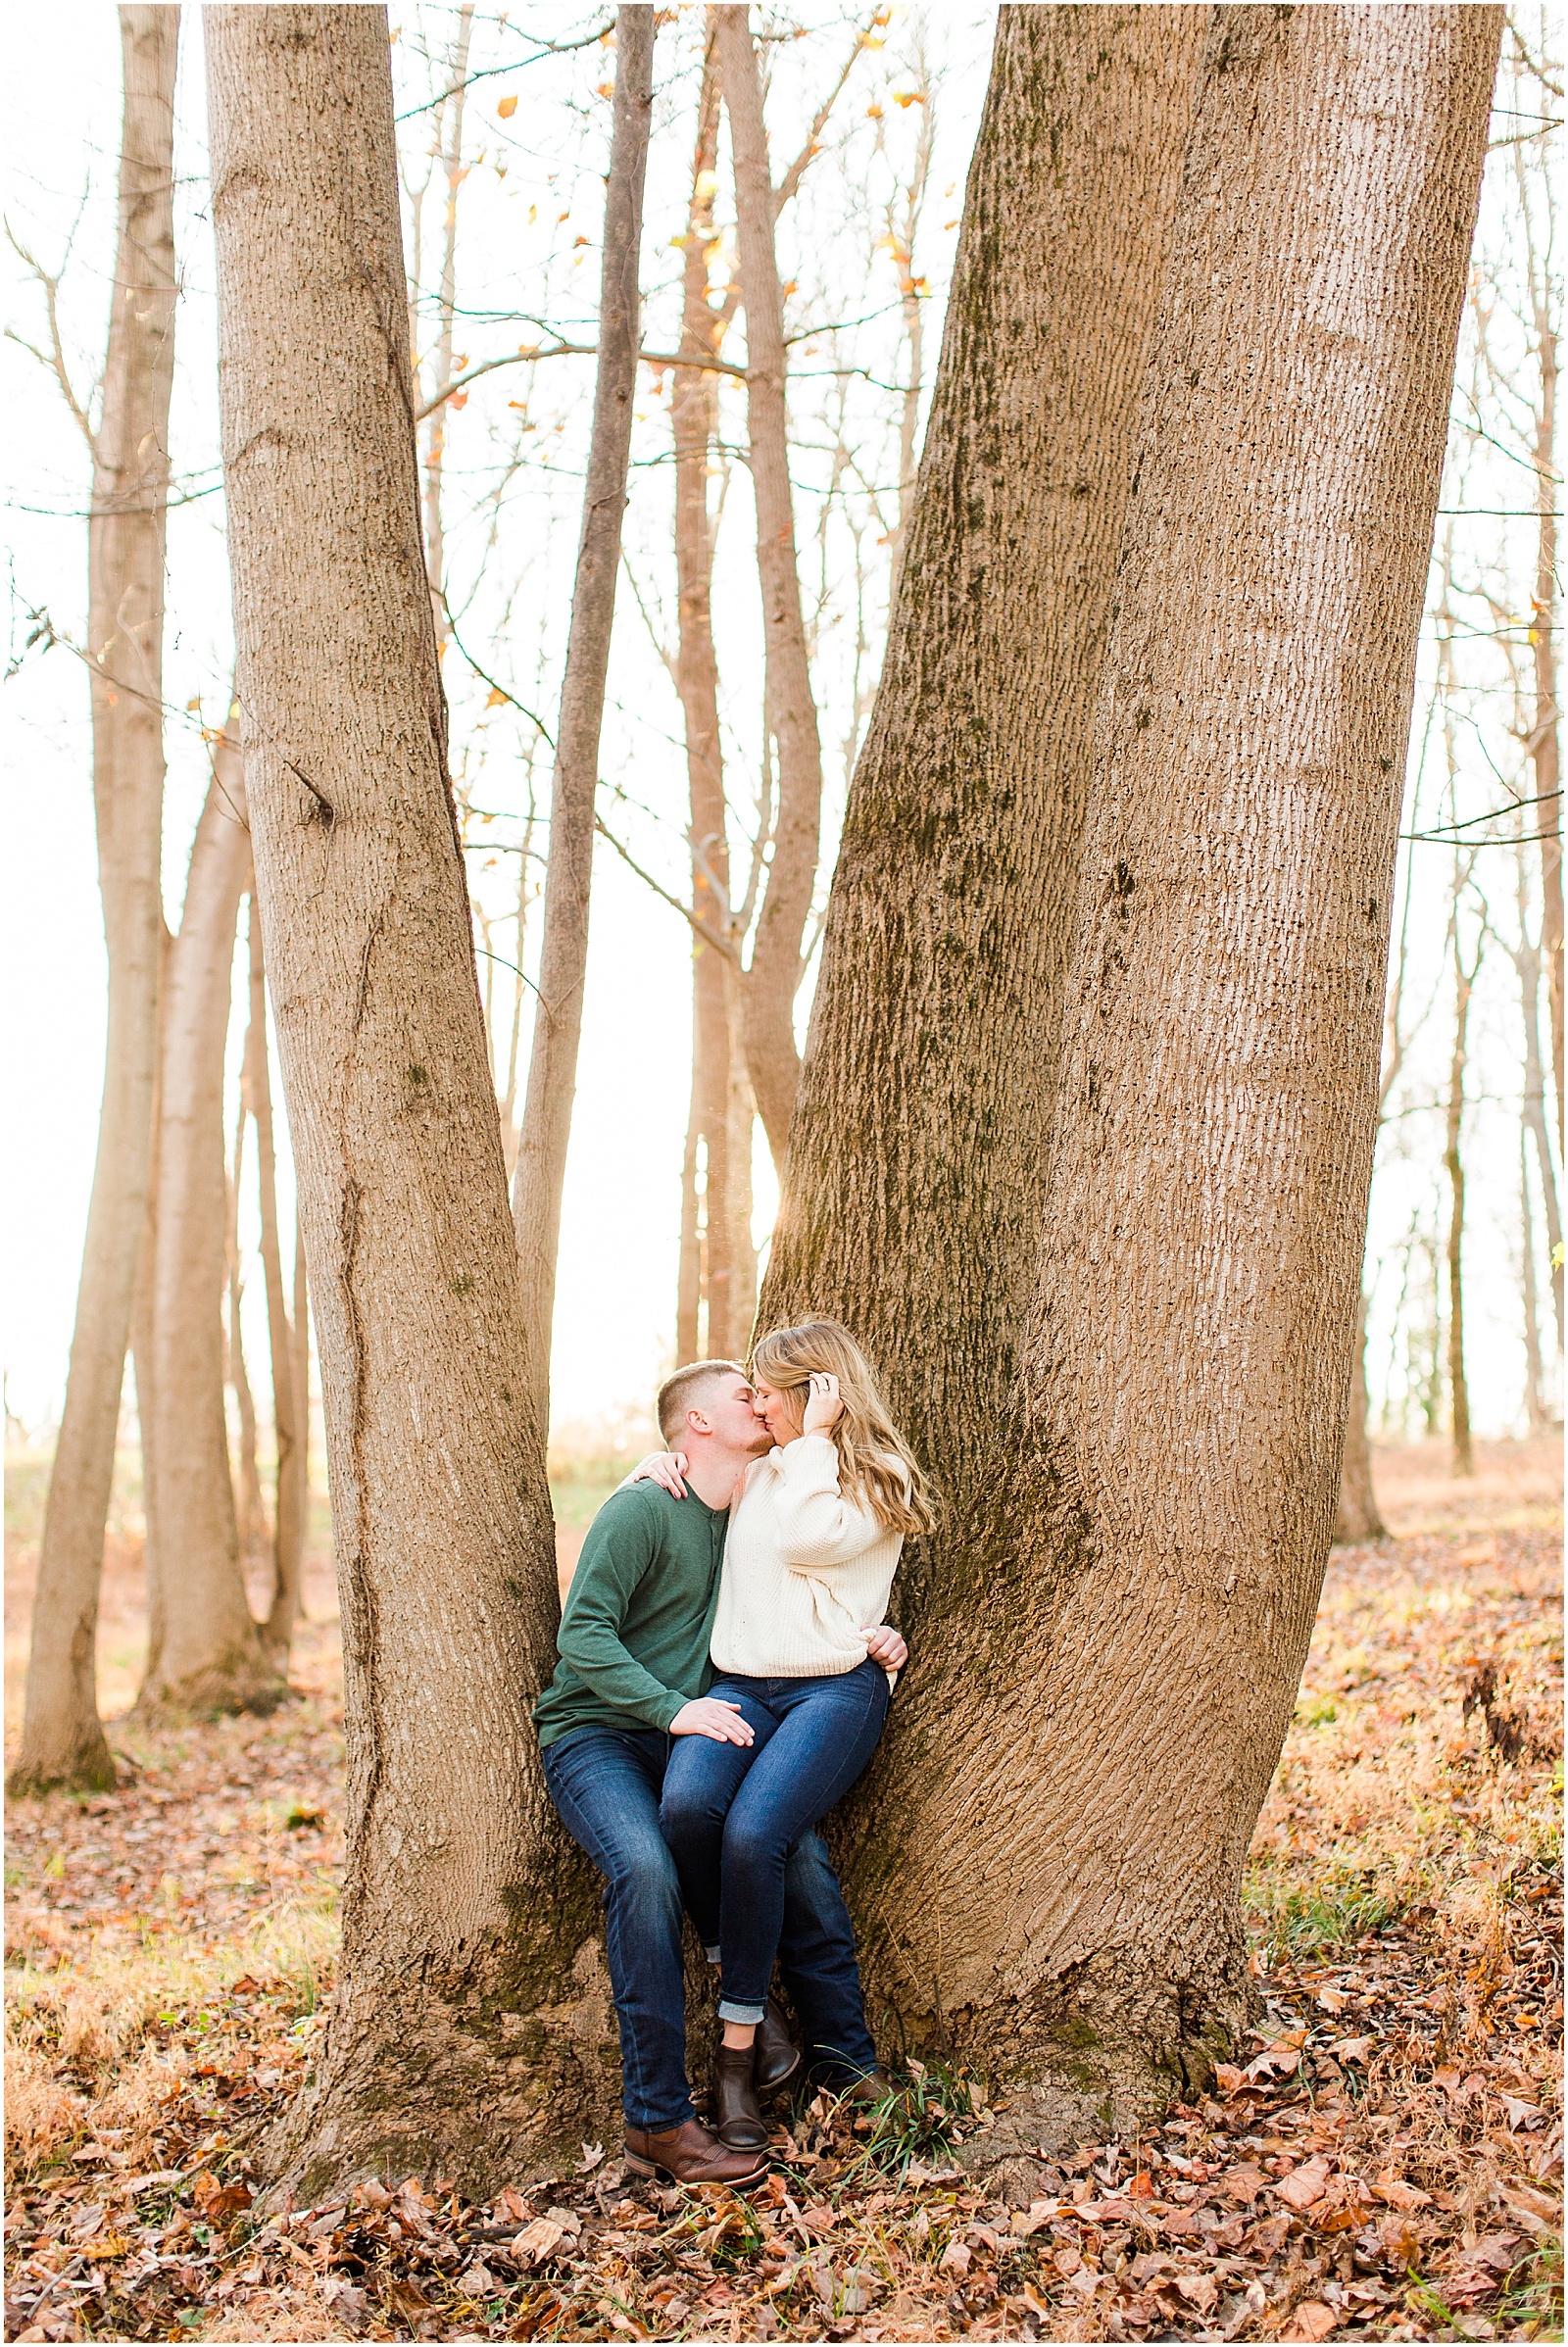 A Fall Southern Indiana Engagement Seesion | Cody and Hannah | Bret and Brandie Photography 029.jpg